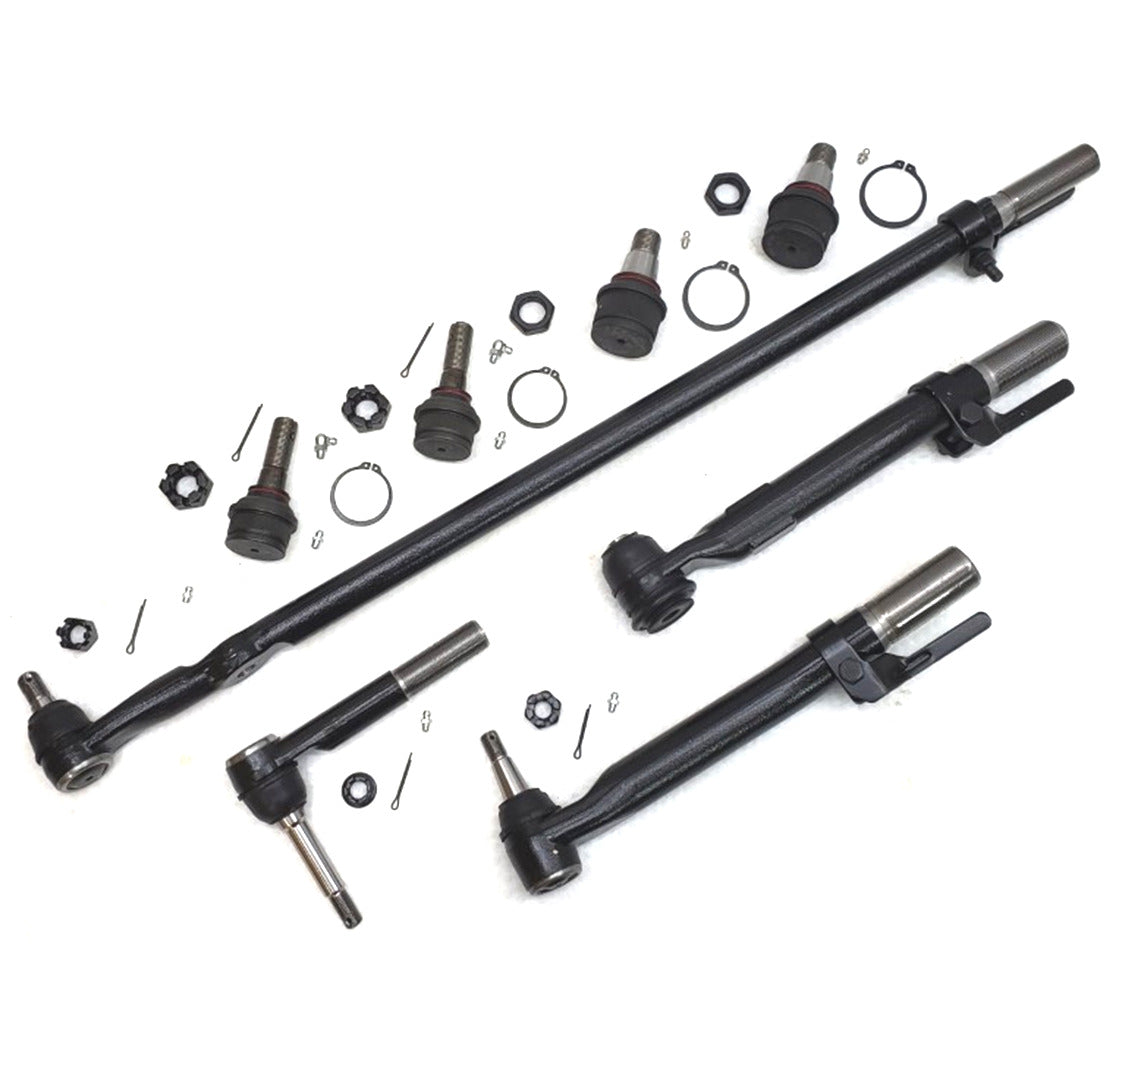 Ford F250 F350 Super Duty 4x4 08-10 HD Ball Joint Drag Link Tie Rod Steering Kit